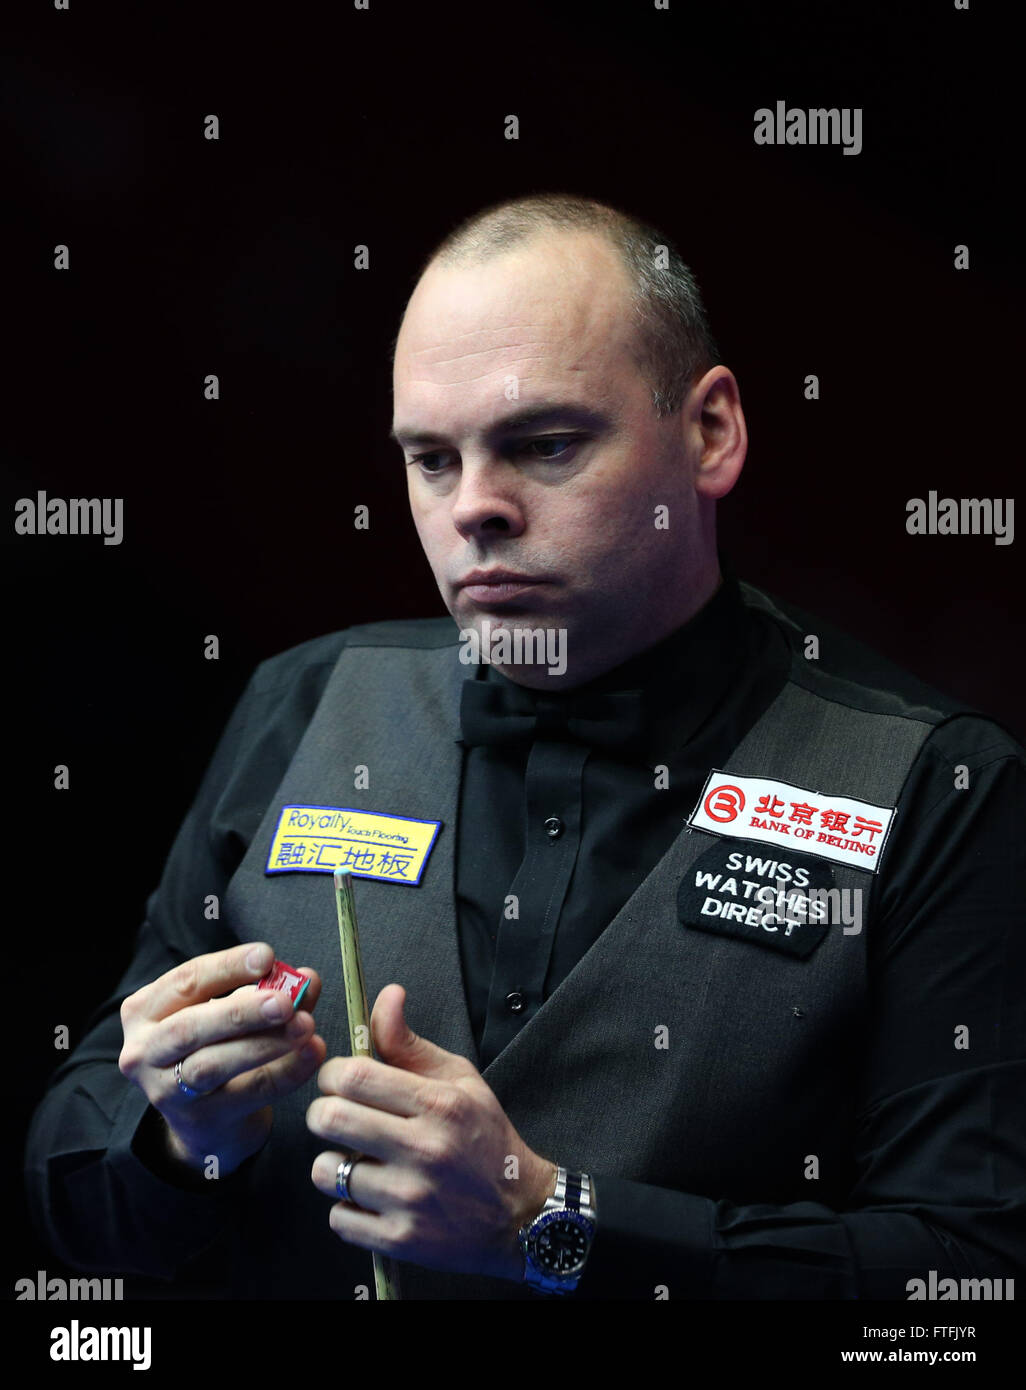 Beijing, China. 28th Mar, 2016. Stuart Bingham of England competes during the wild card round match aganst Cao Yupeng of China at the 2016 World Snooker China Open in Beijing, capital of China, March 28, 2016. Stuart Bingham won 5-0. Credit:  Meng Yongmin/Xinhua/Alamy Live News Stock Photo